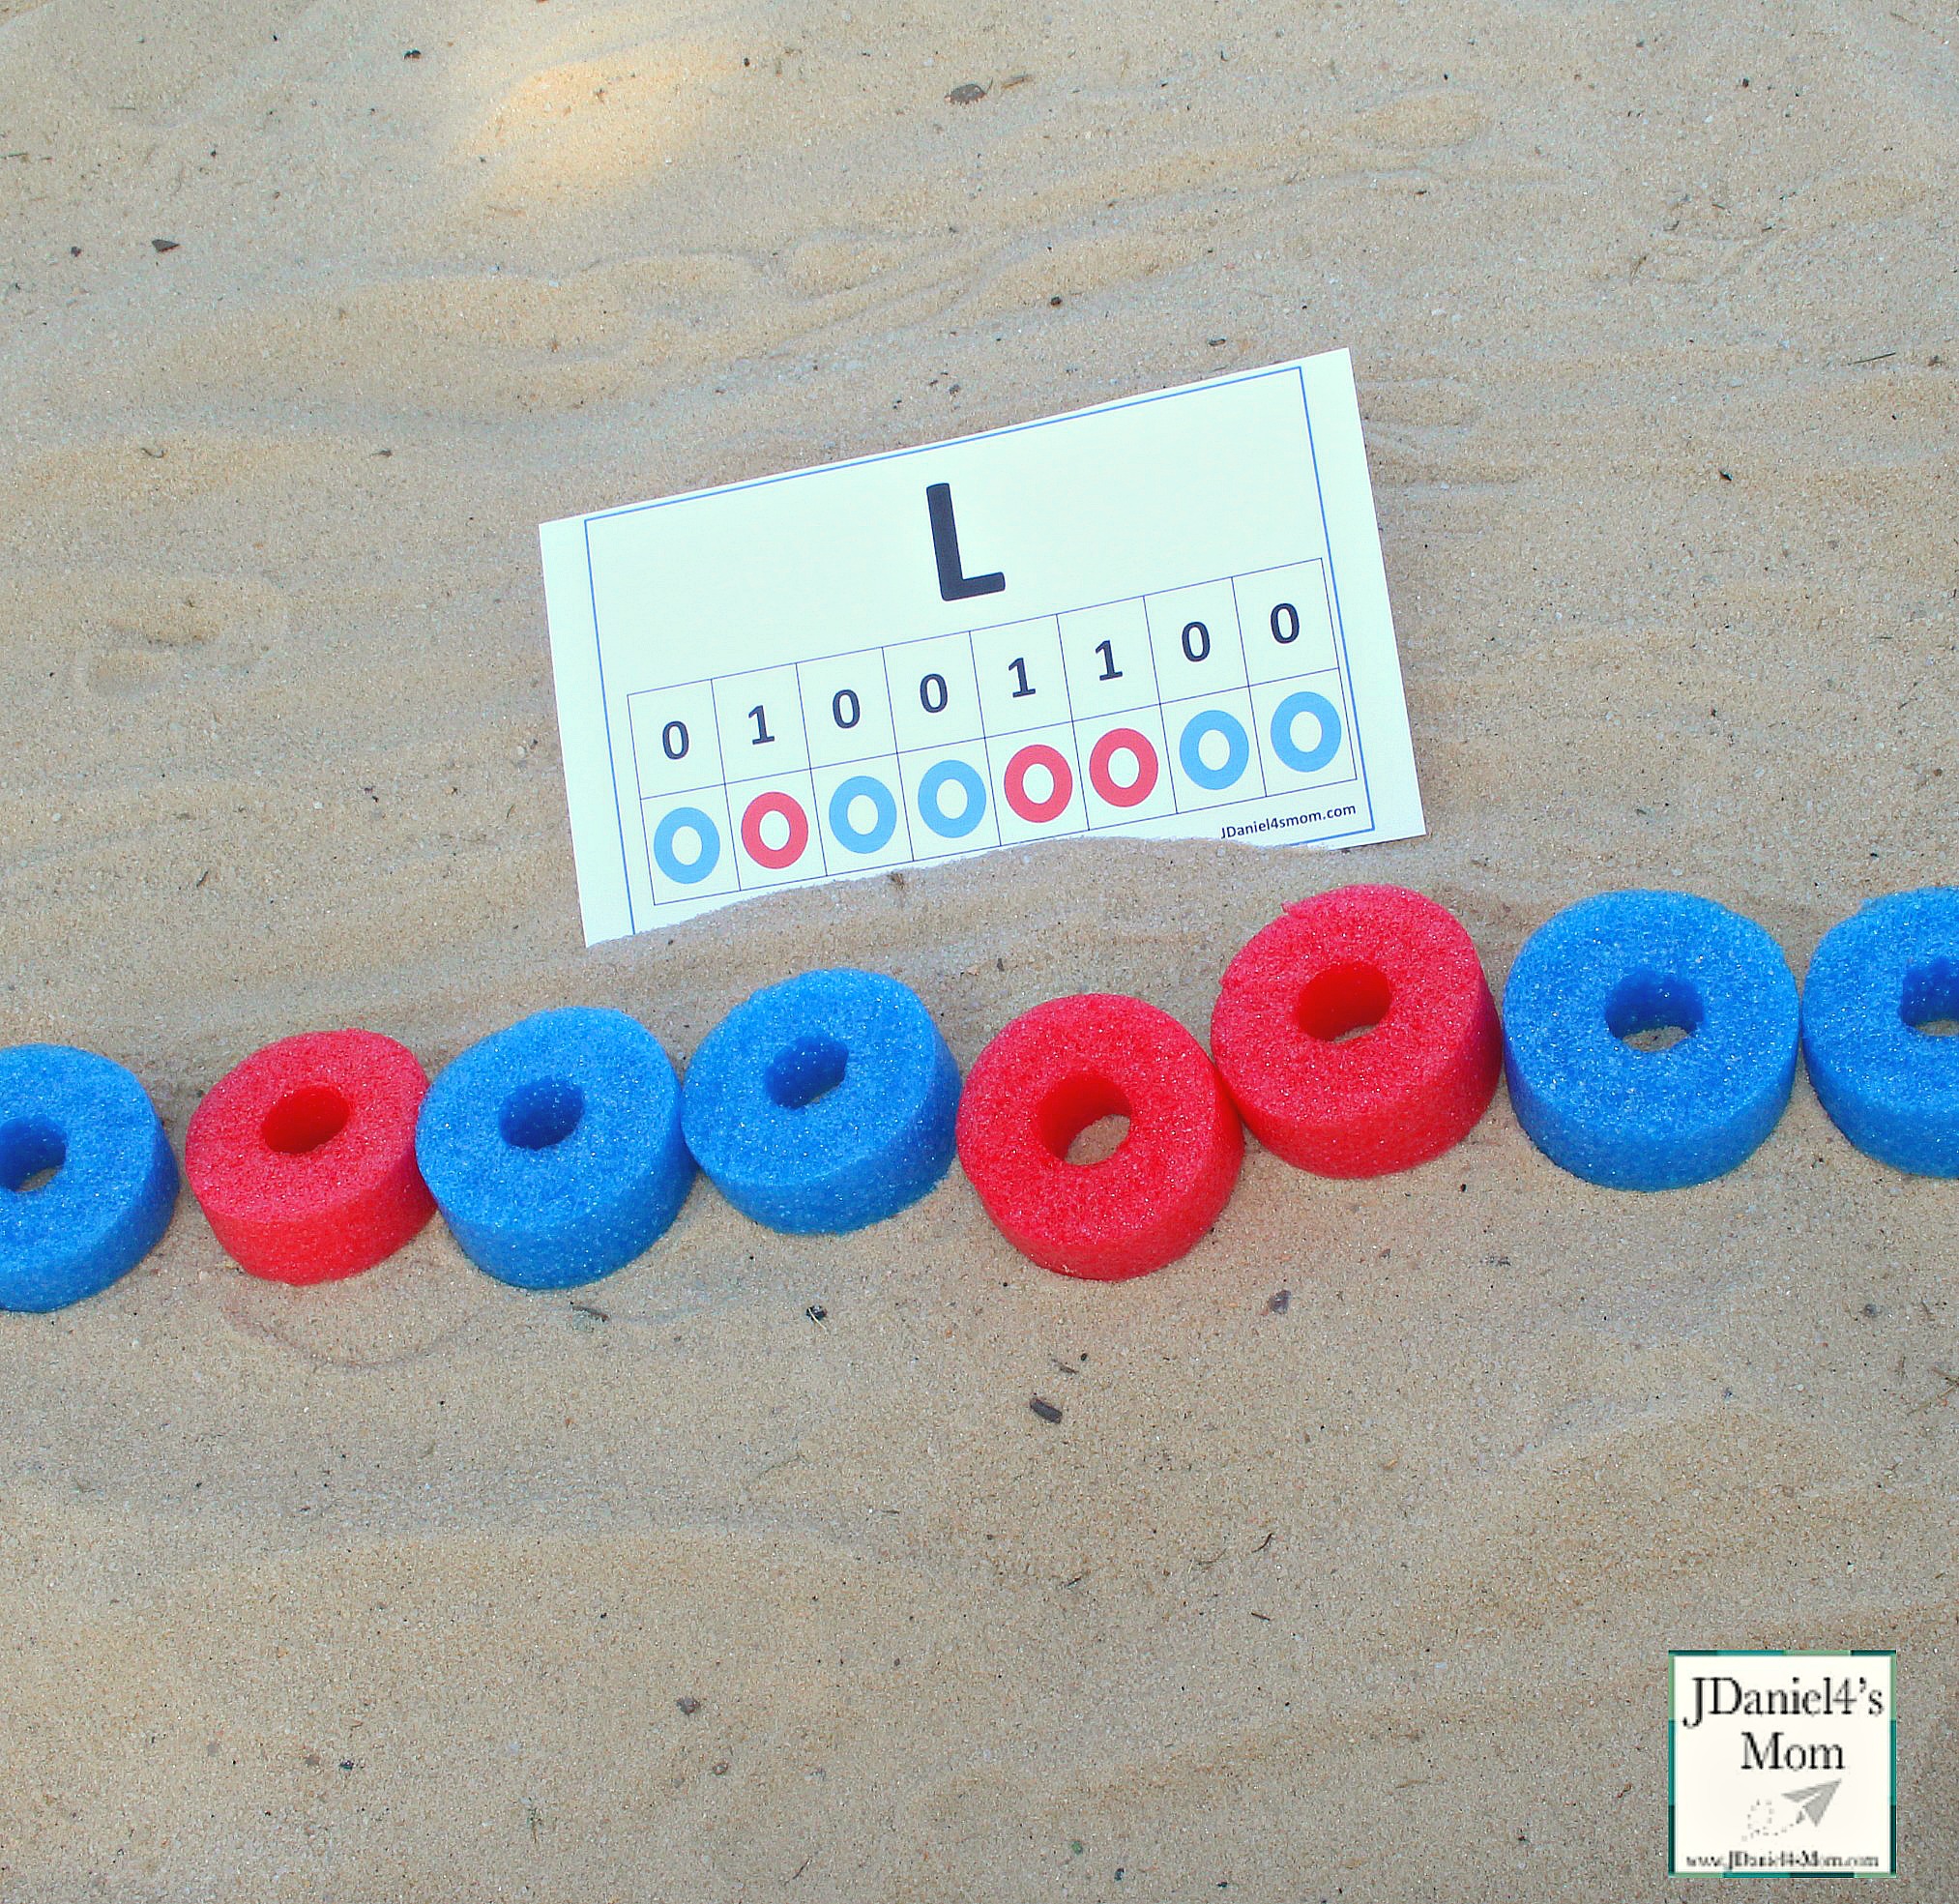 Building Letters in Binary Code Pool Noodle Ideas - The Letter L